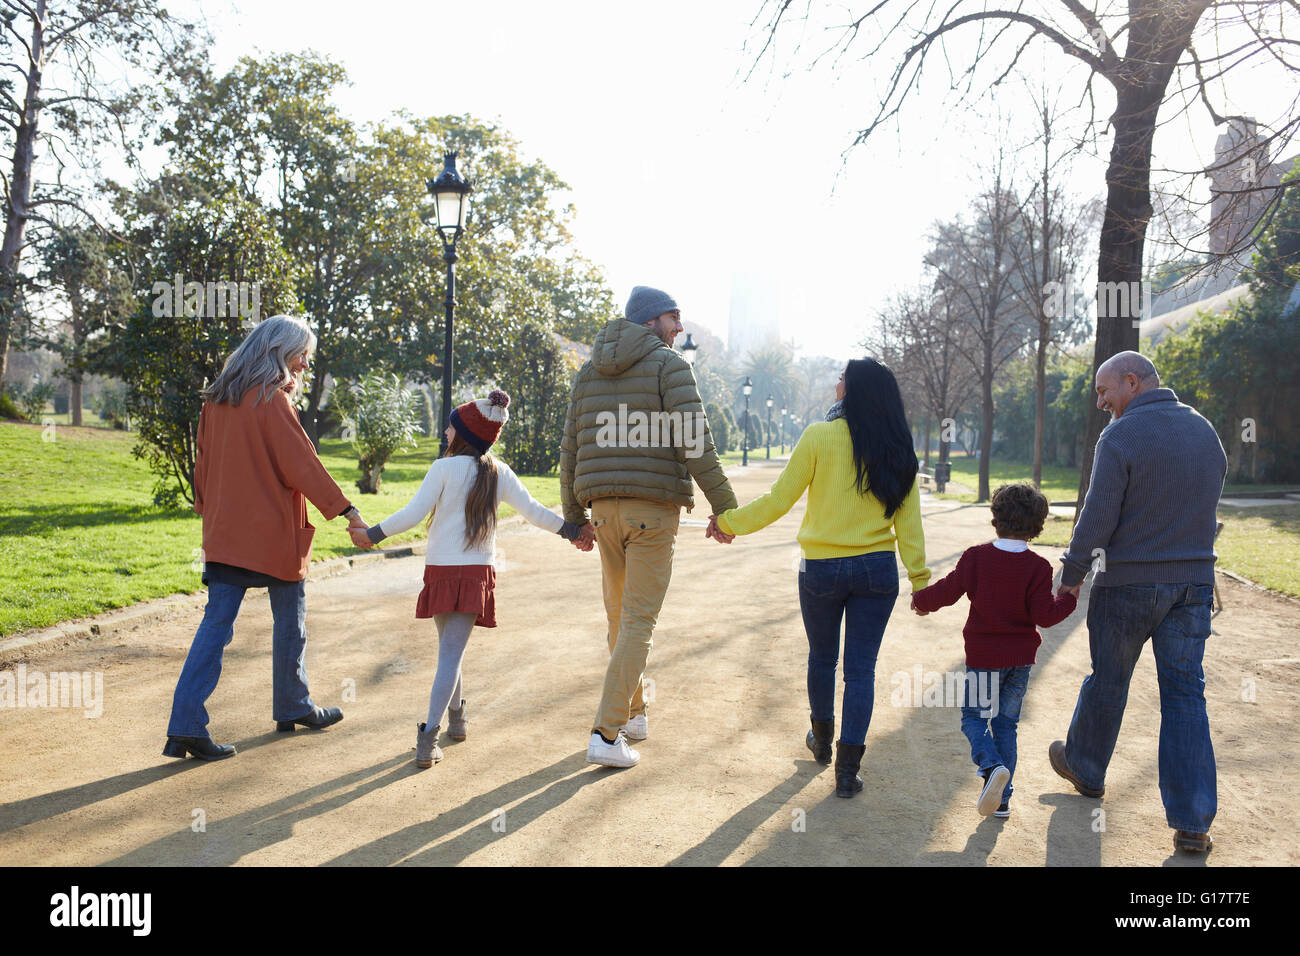 Rear view of multi generation family walking in park Stock Photo